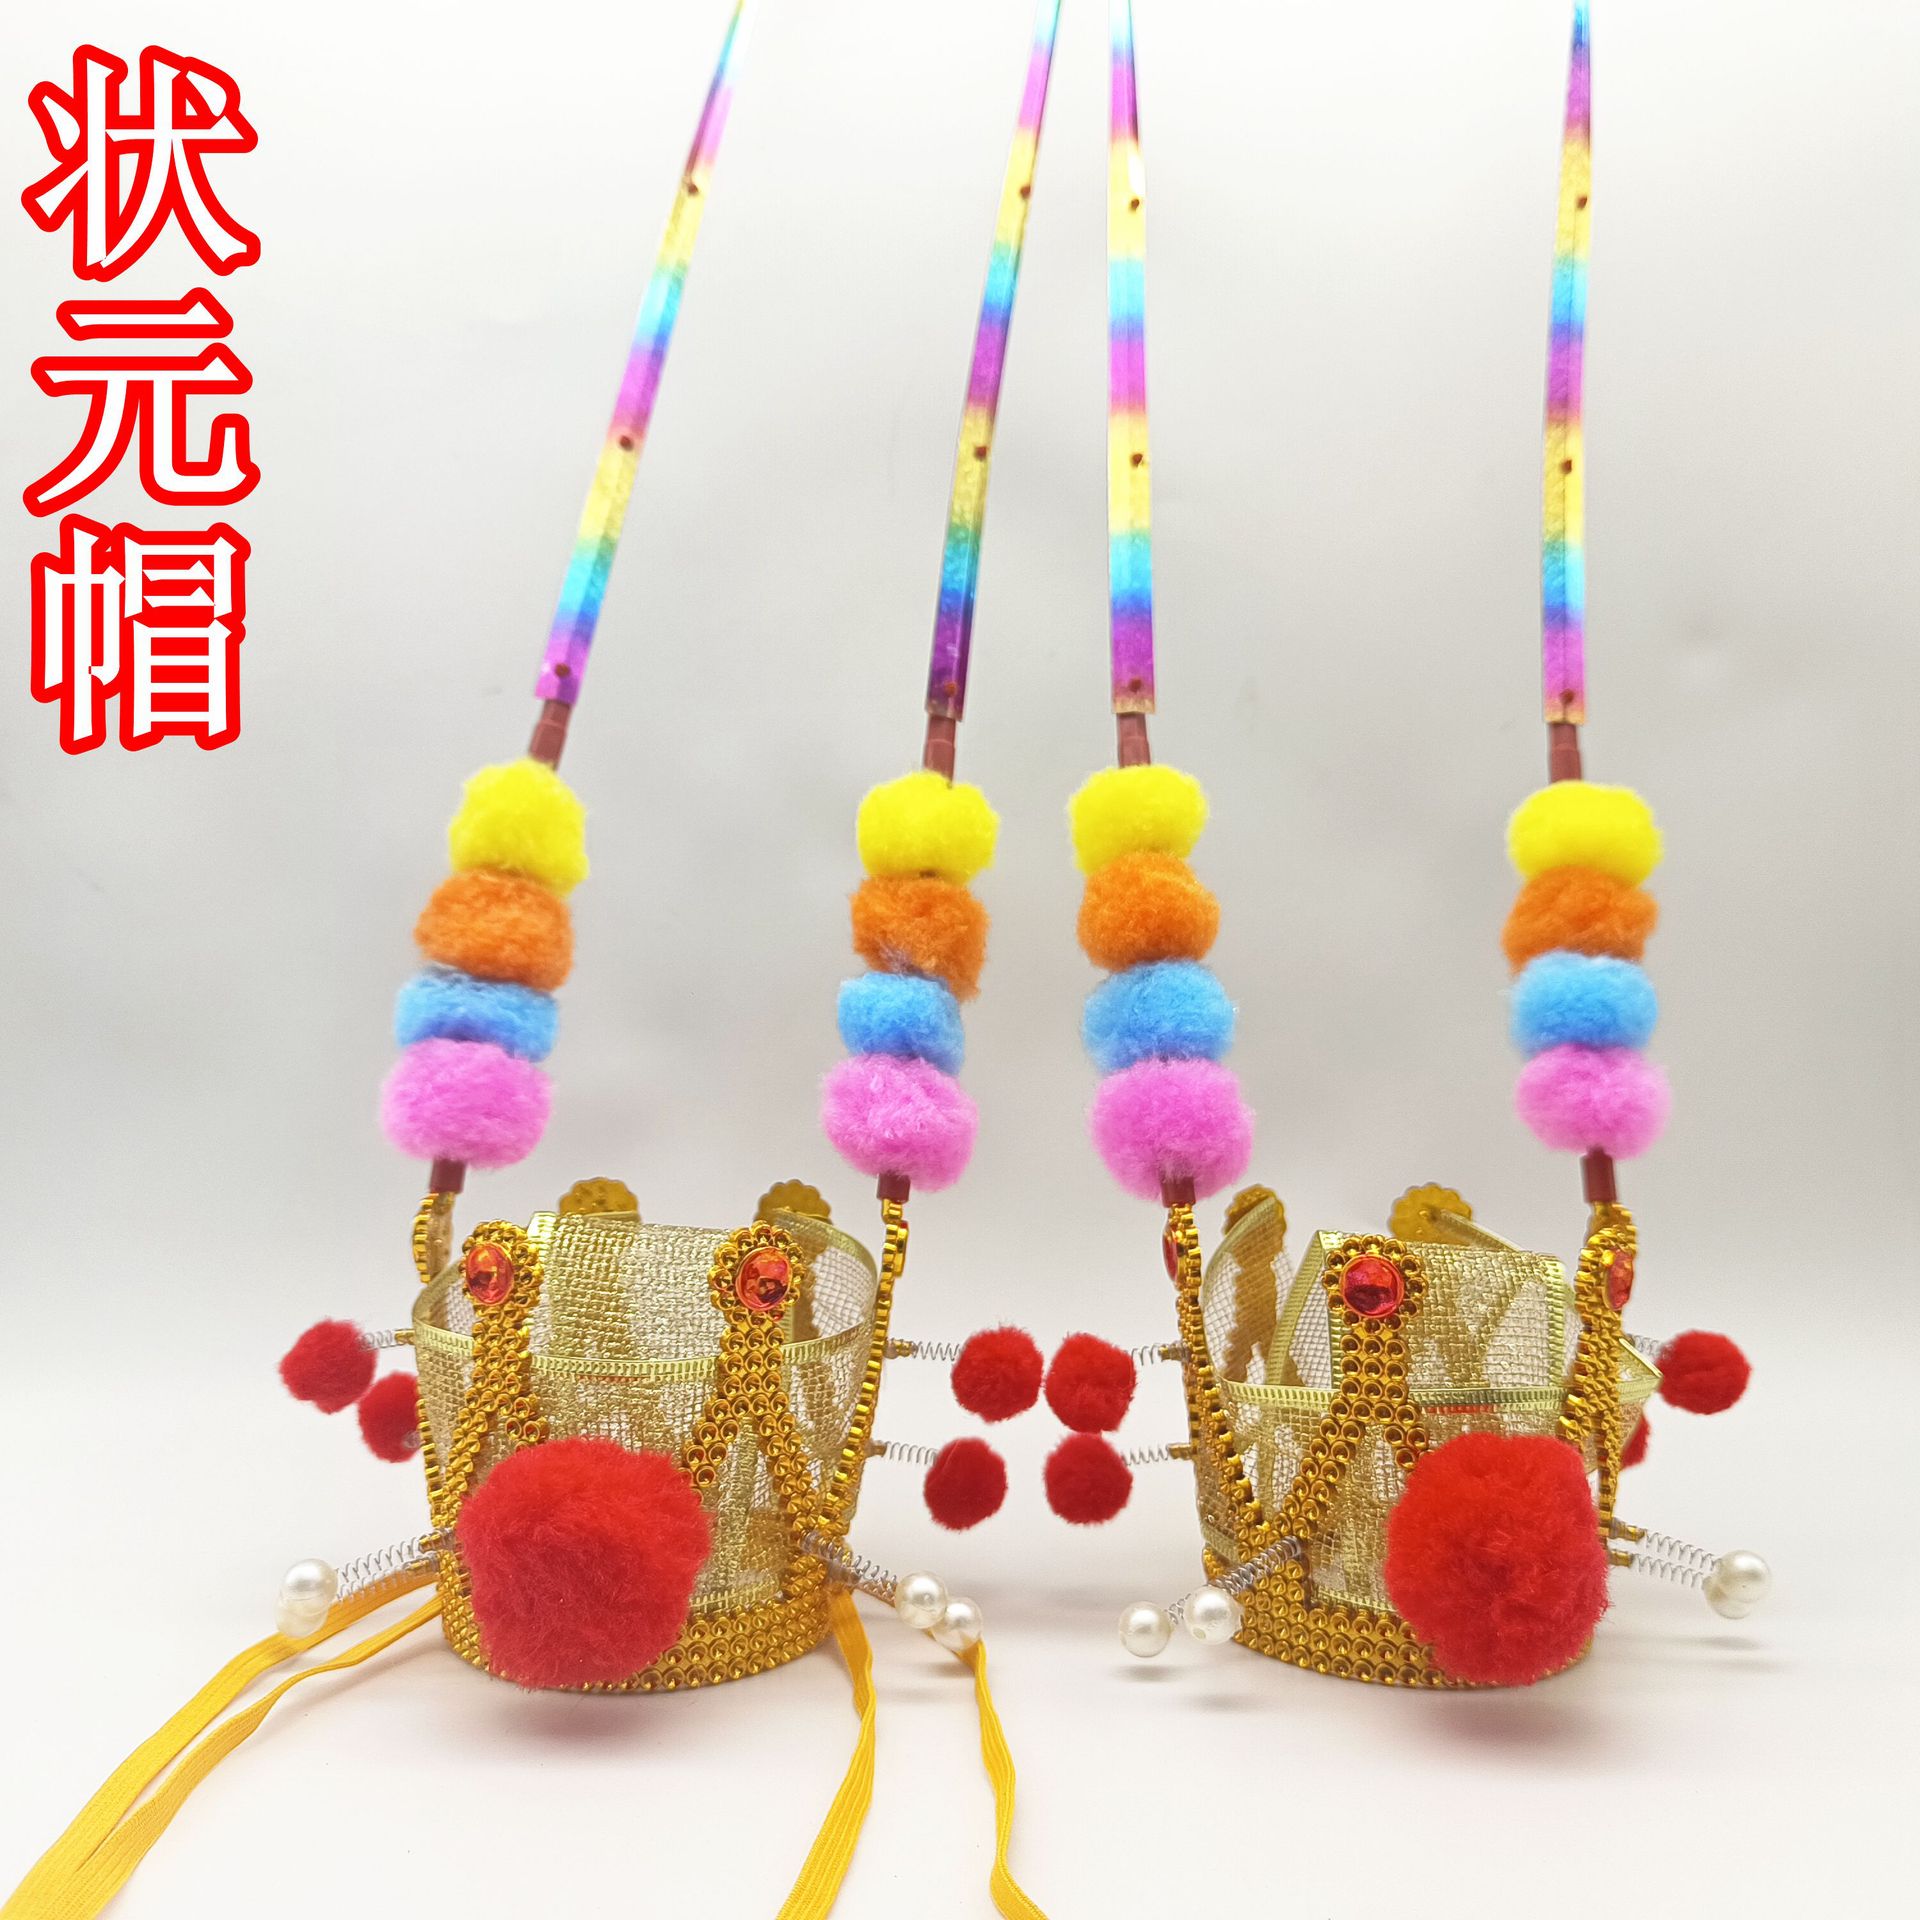 new number one scholar‘s hat sun wukong hat wukong hat electroplating luminous purple gold crown monkey king hat monkey hat props